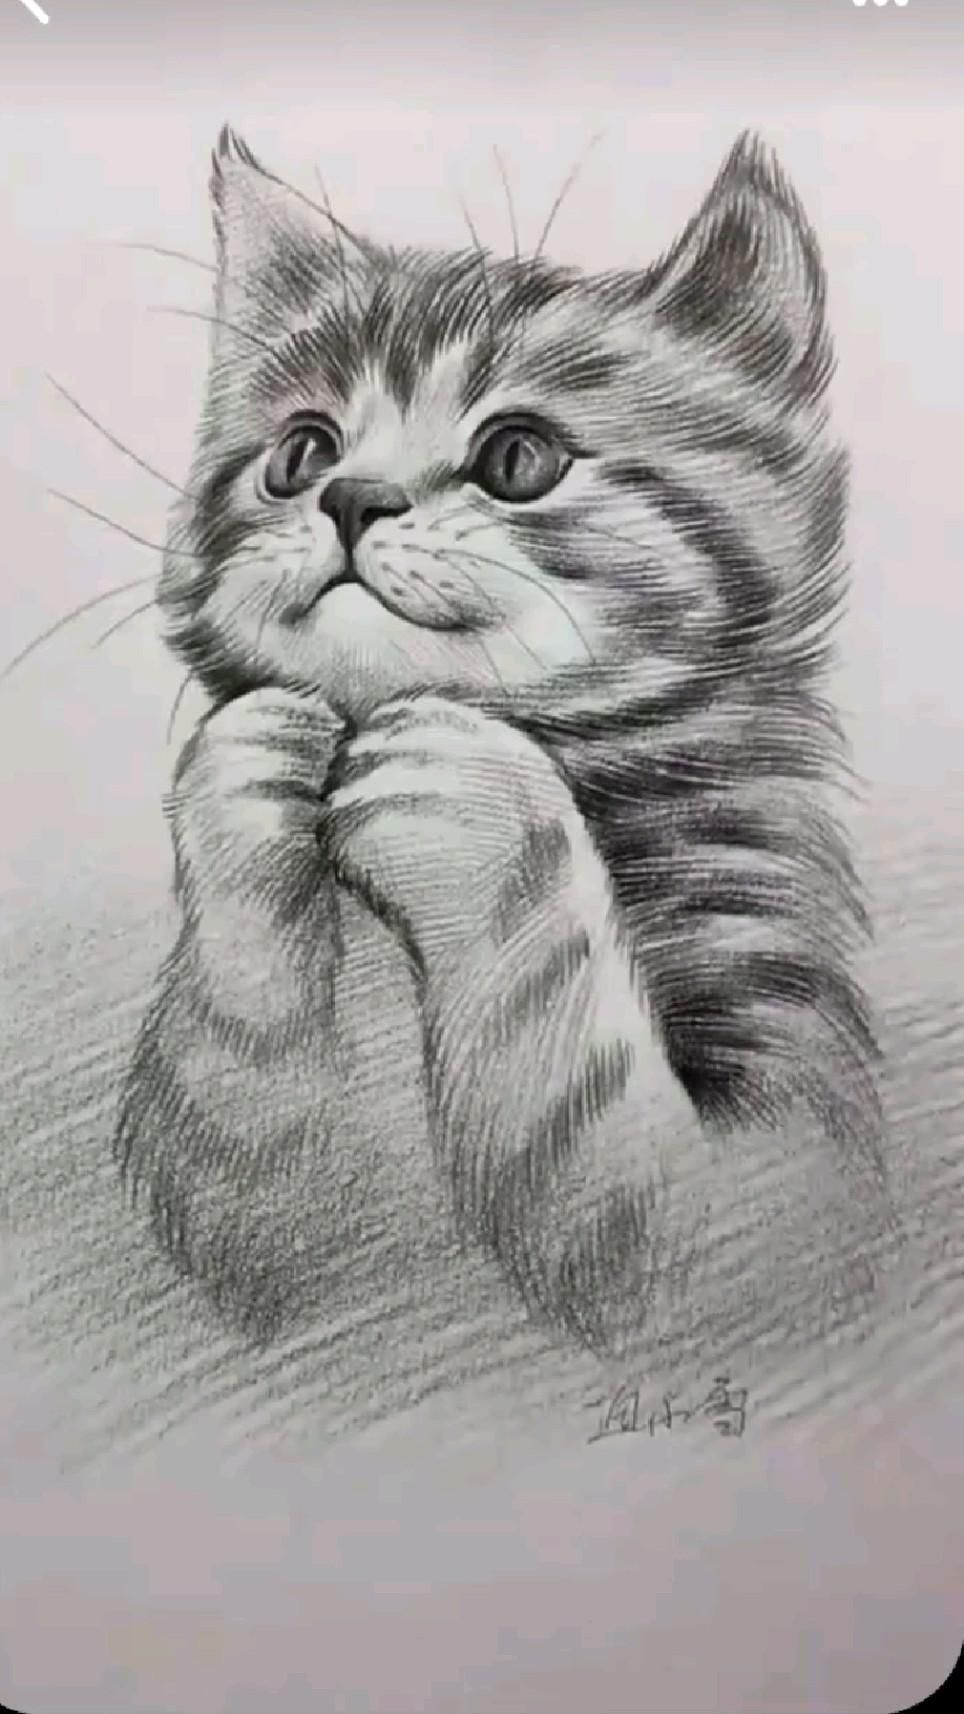 Old Cat Sketch 1 - Pinkfoot Gallery